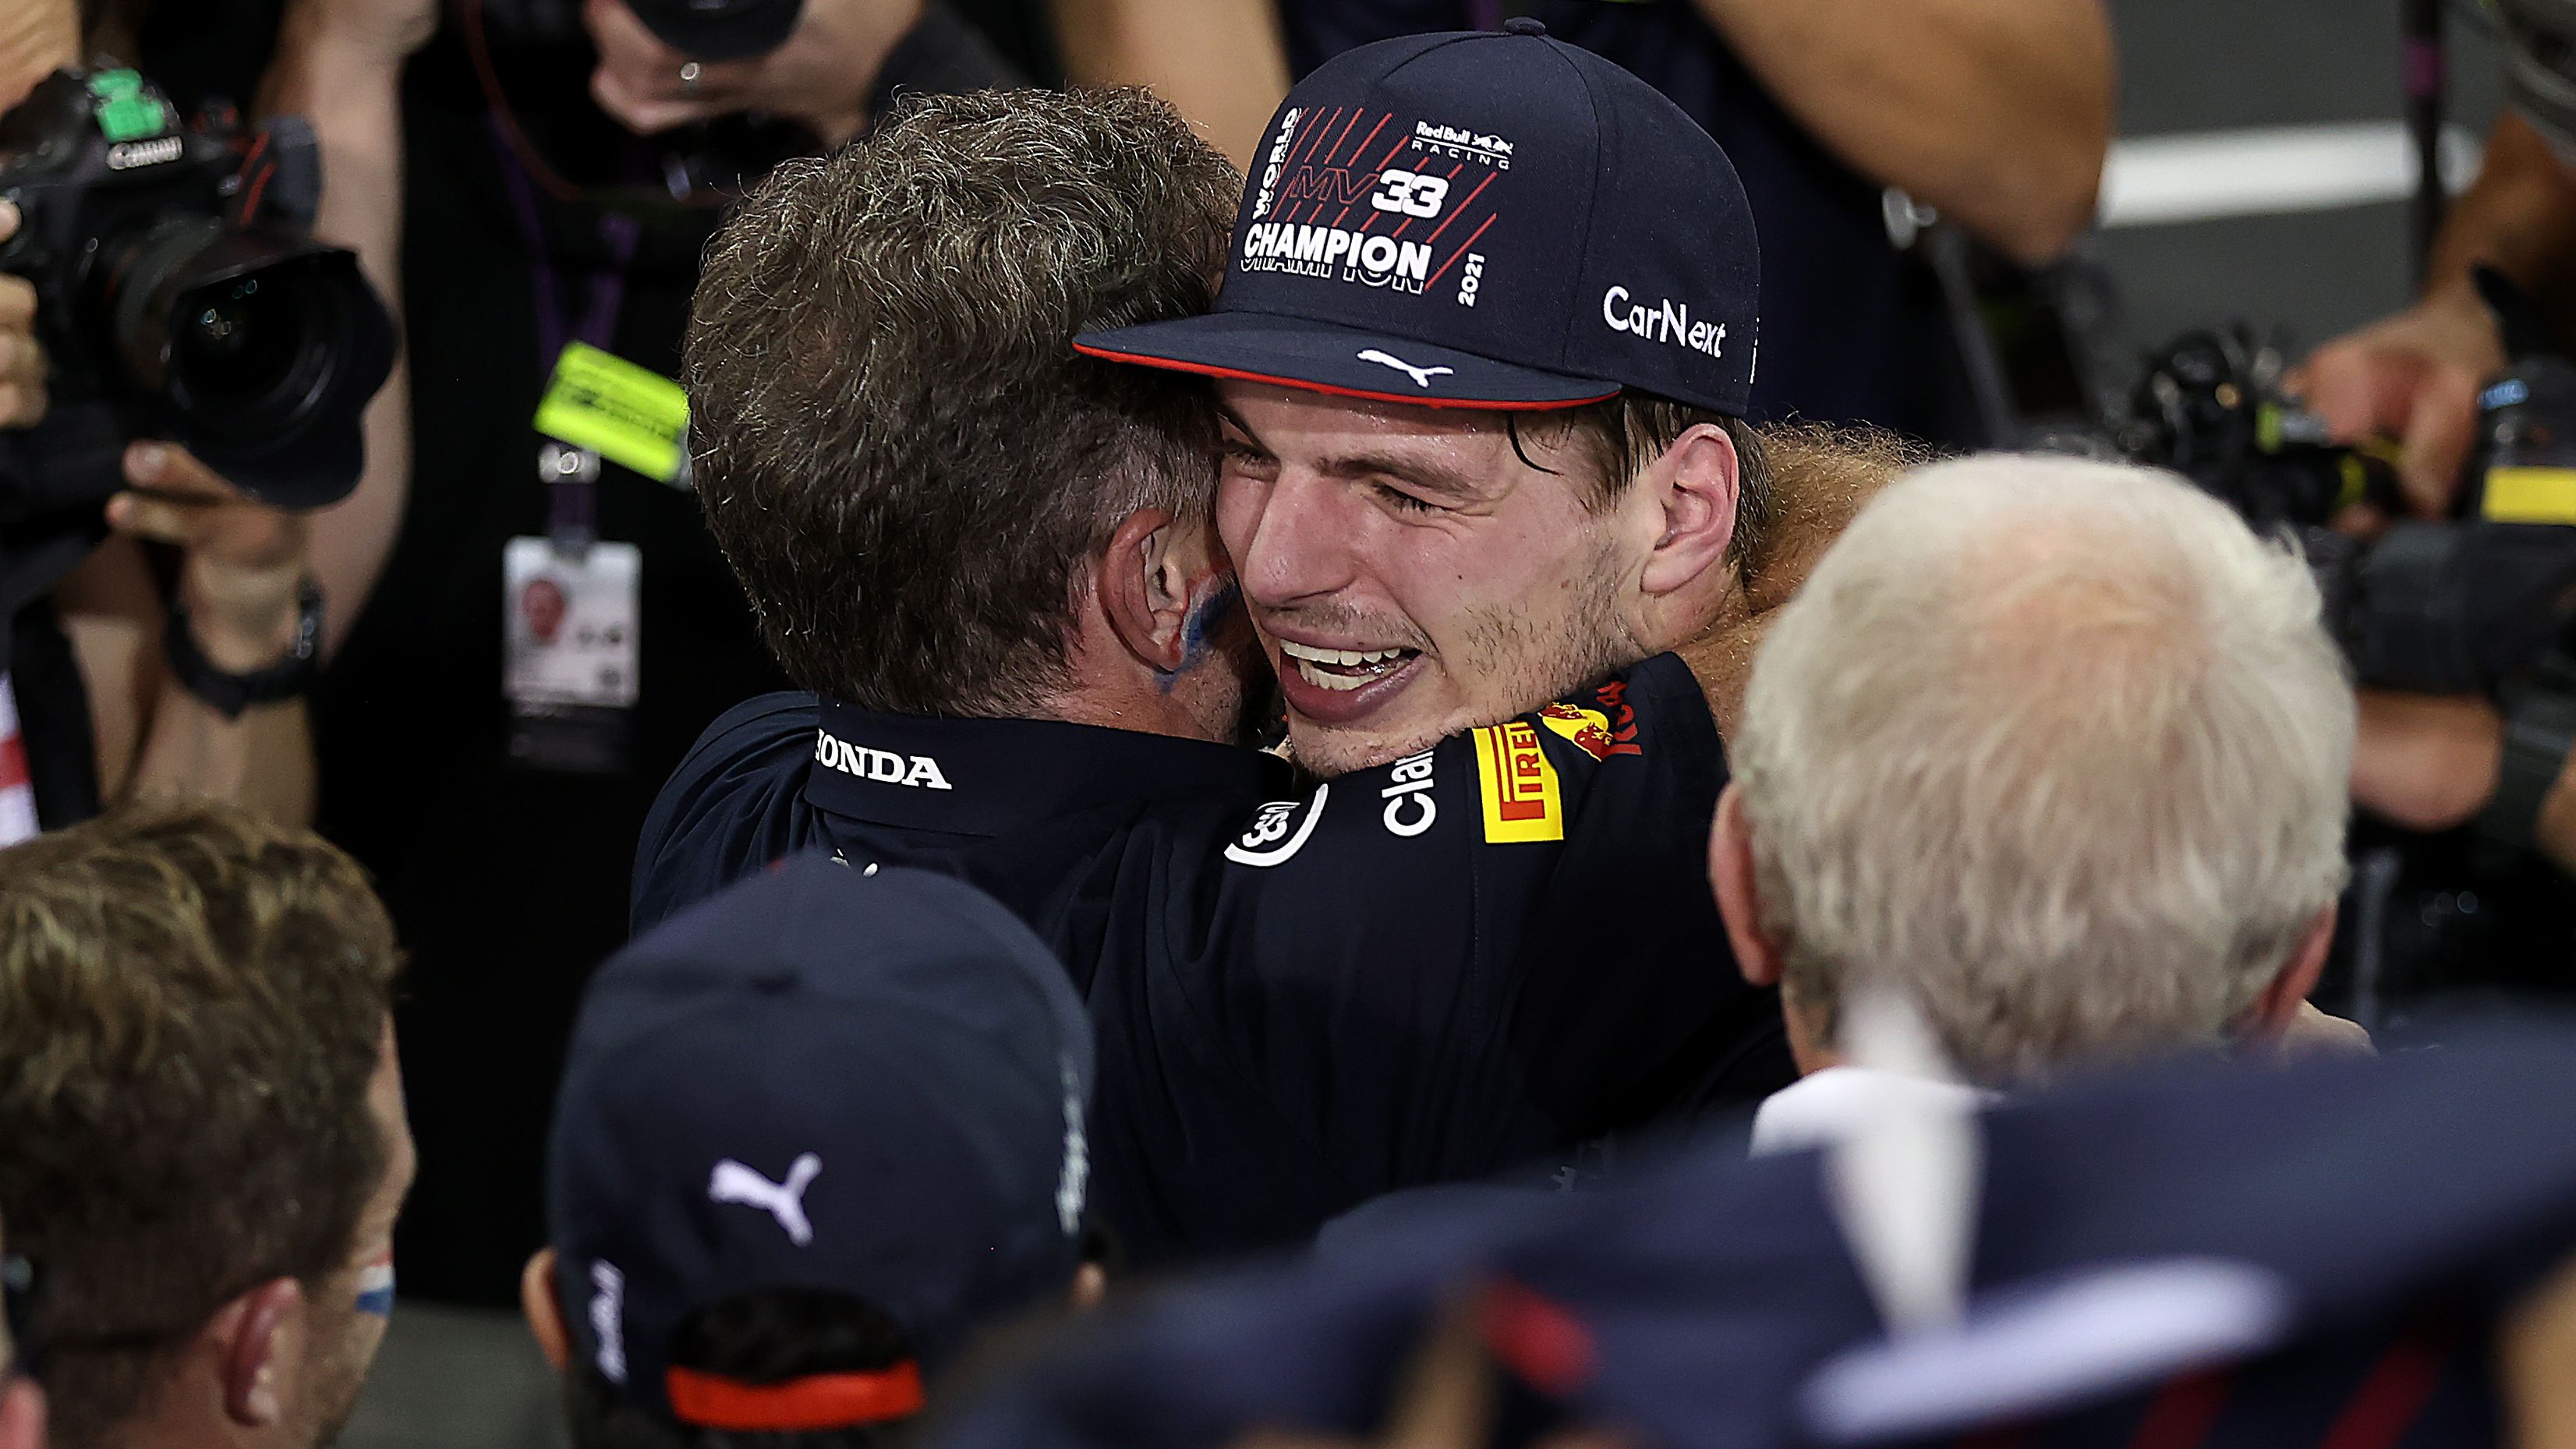 Verstappen claims maiden F1 championship in drama-packed finale